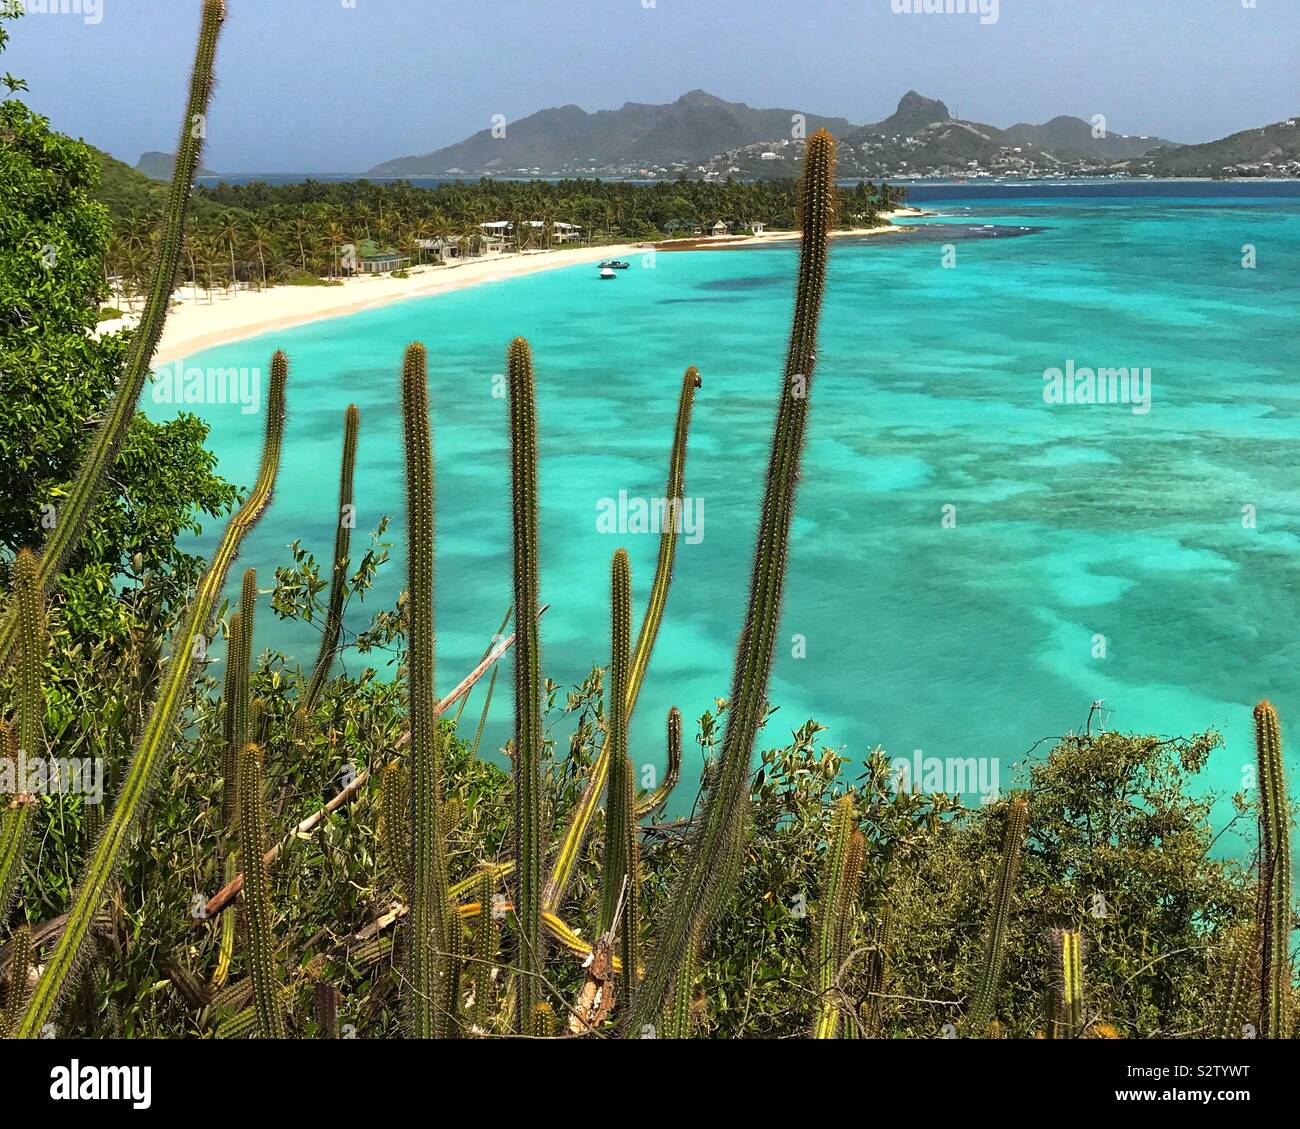 Palm Island in The Grenadines, view through the Cactuses of Beach and Union Island Stock Photo